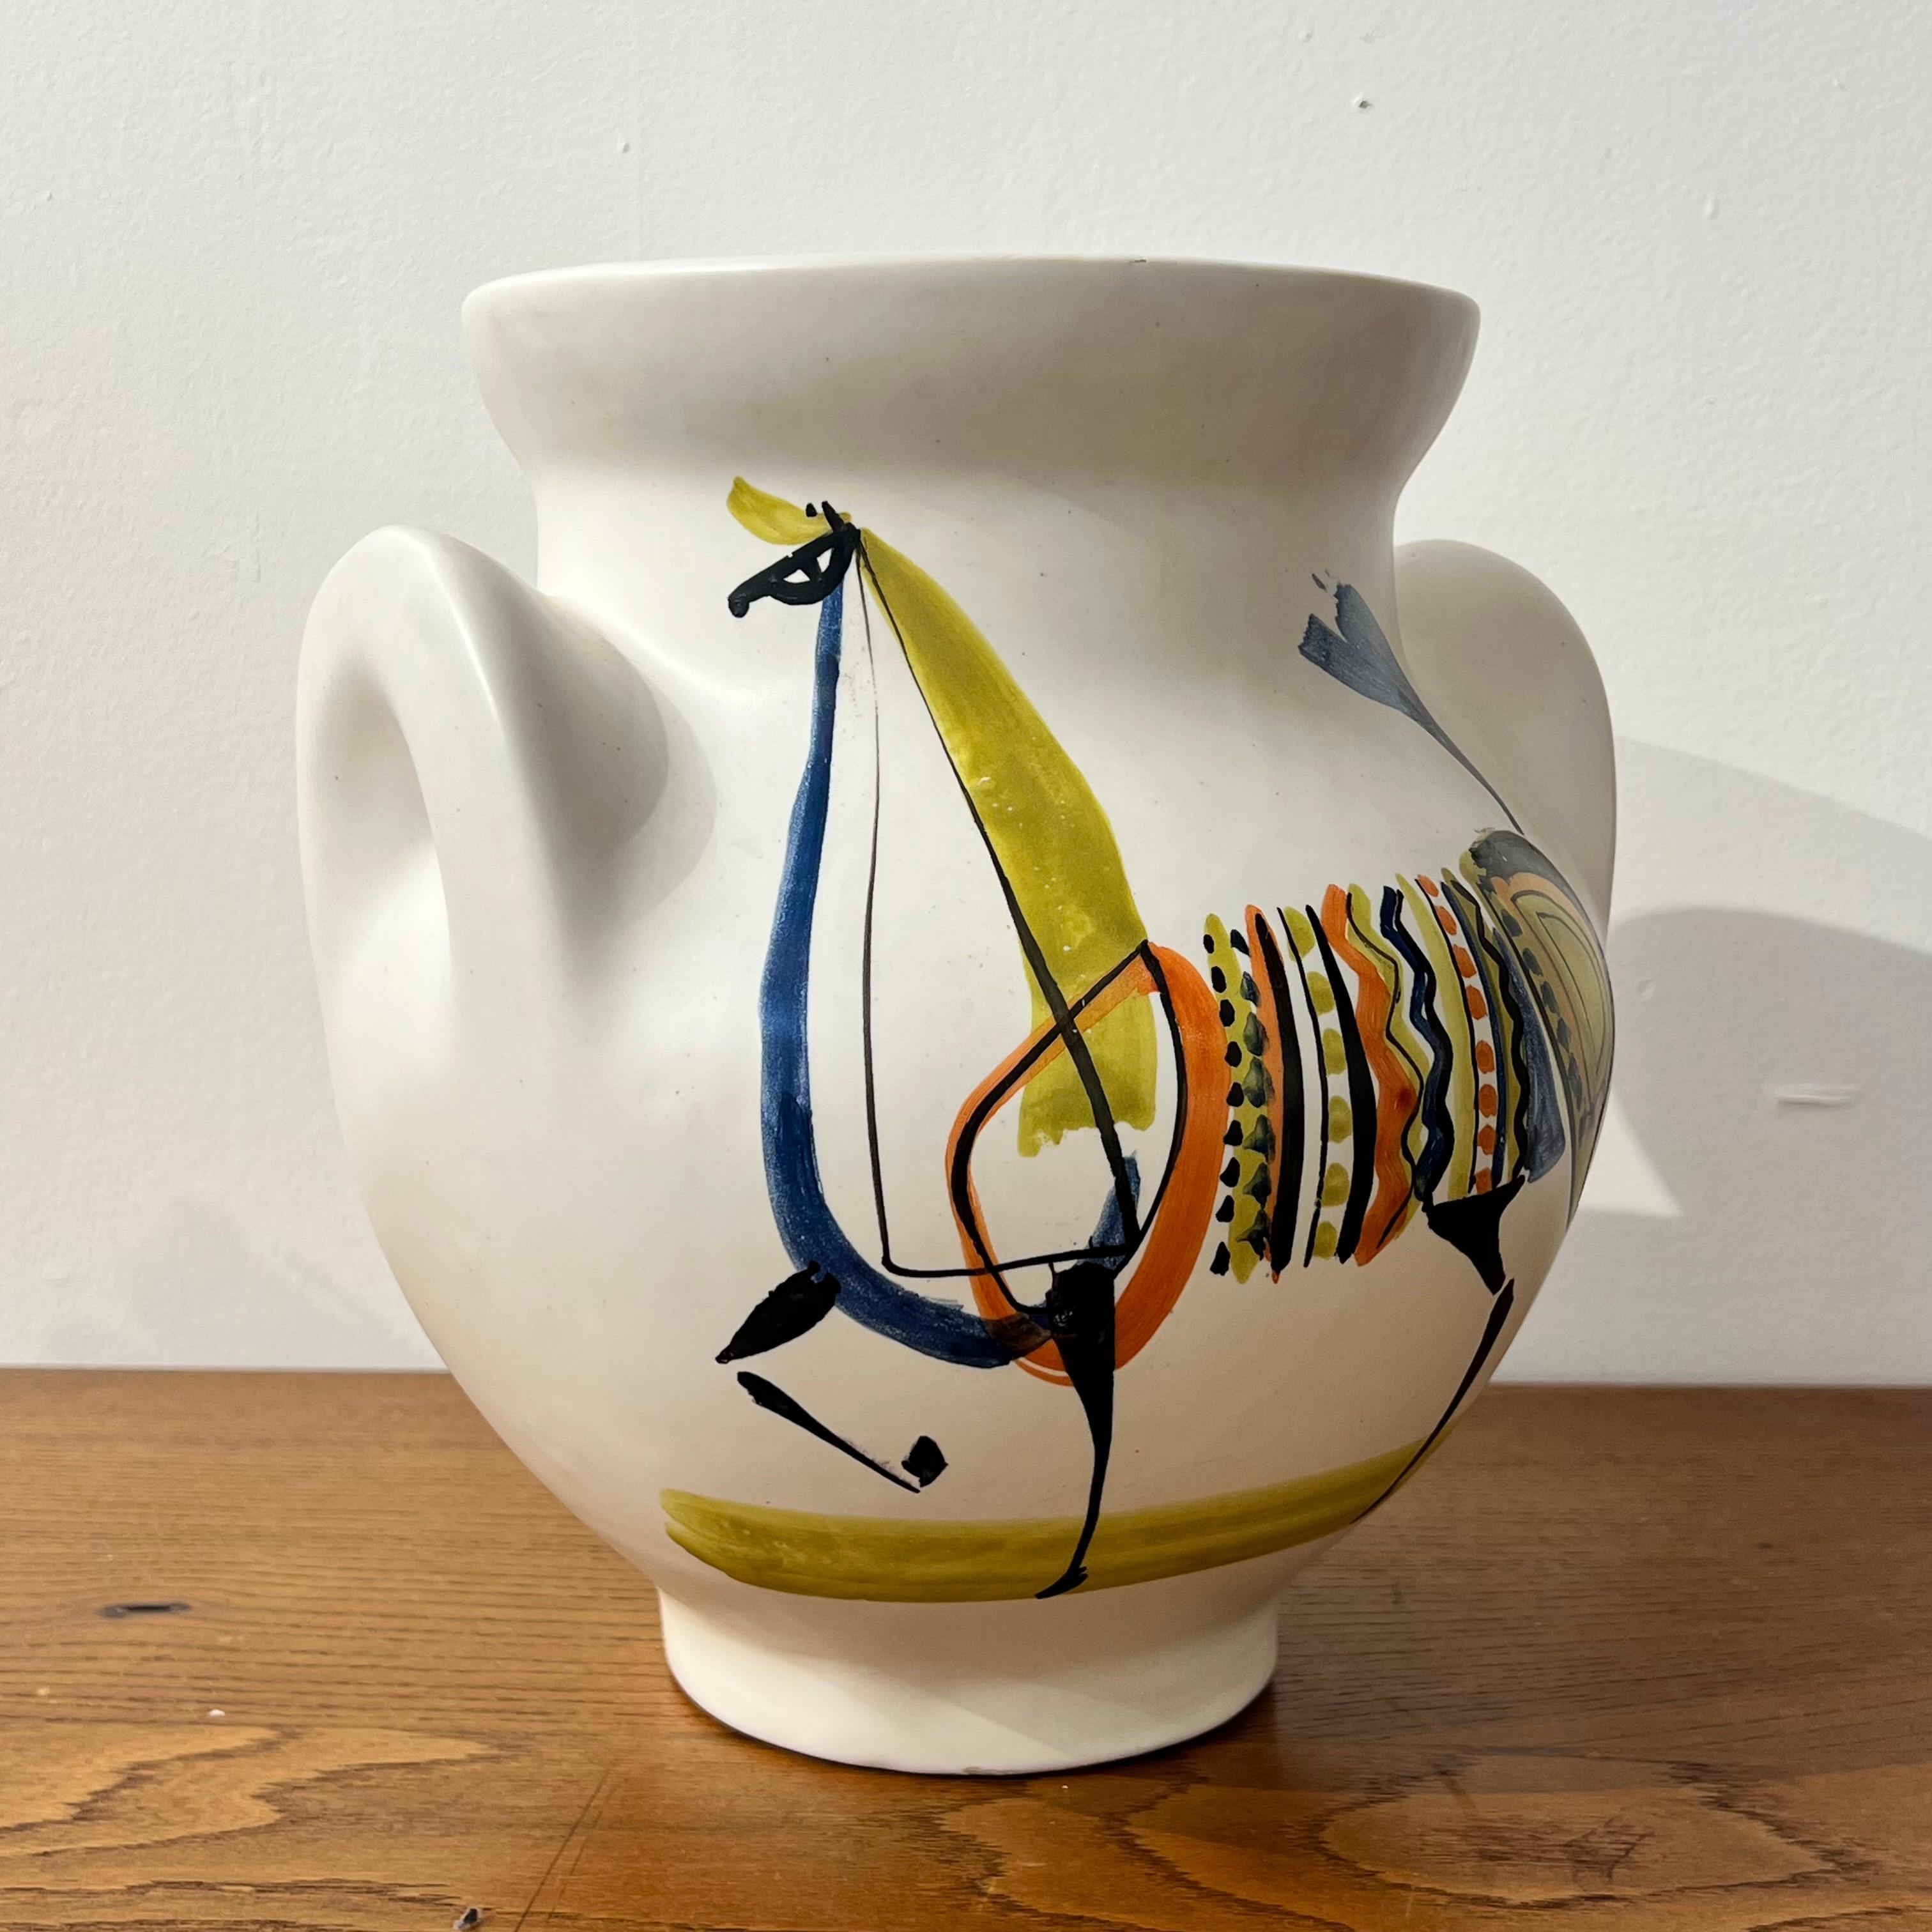 A beautiful vase à oreilles by Roger Capron

Made in the 1950s in Vallauris, this beautiful exemple shows a nice zoomorphe decor

These are the most collectible forms of vases by the artist